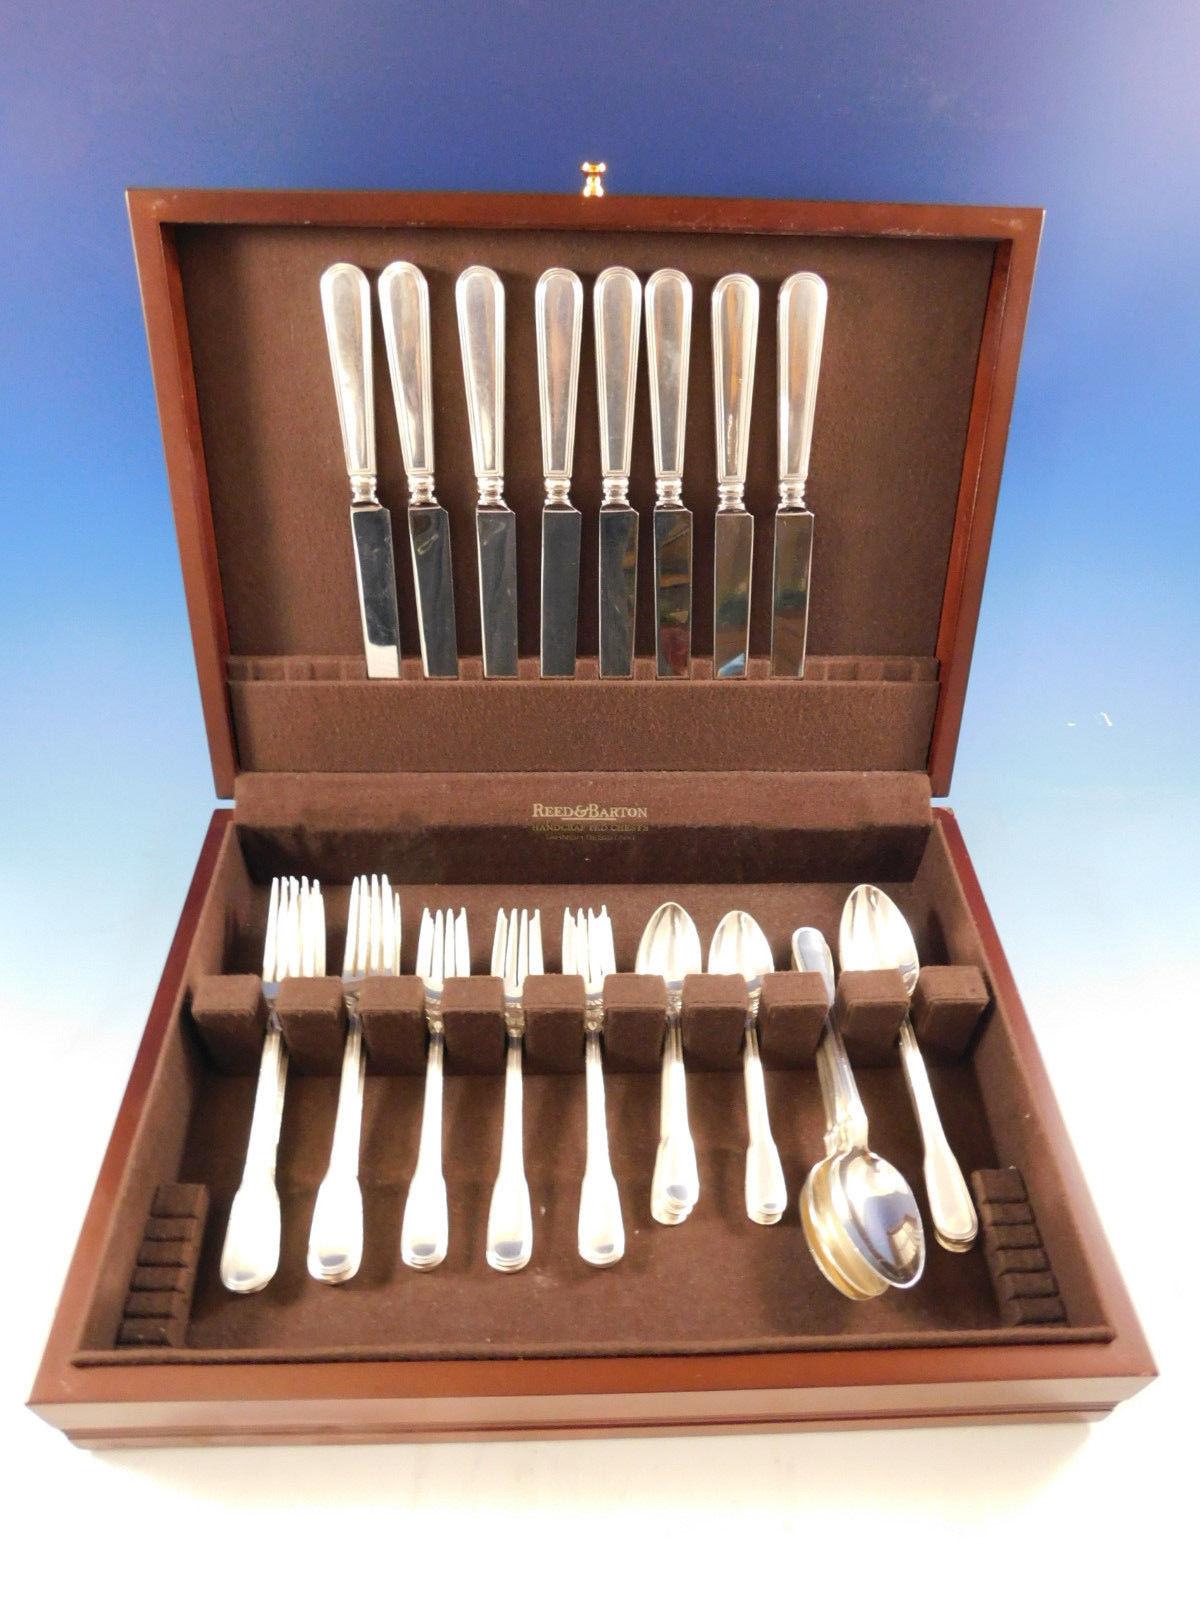 Dinner size Hamilton aka Gramercy by Tiffany & Co. sterling silver flatware set of 40 pieces. This set includes:

8 large dinner size knives, 10